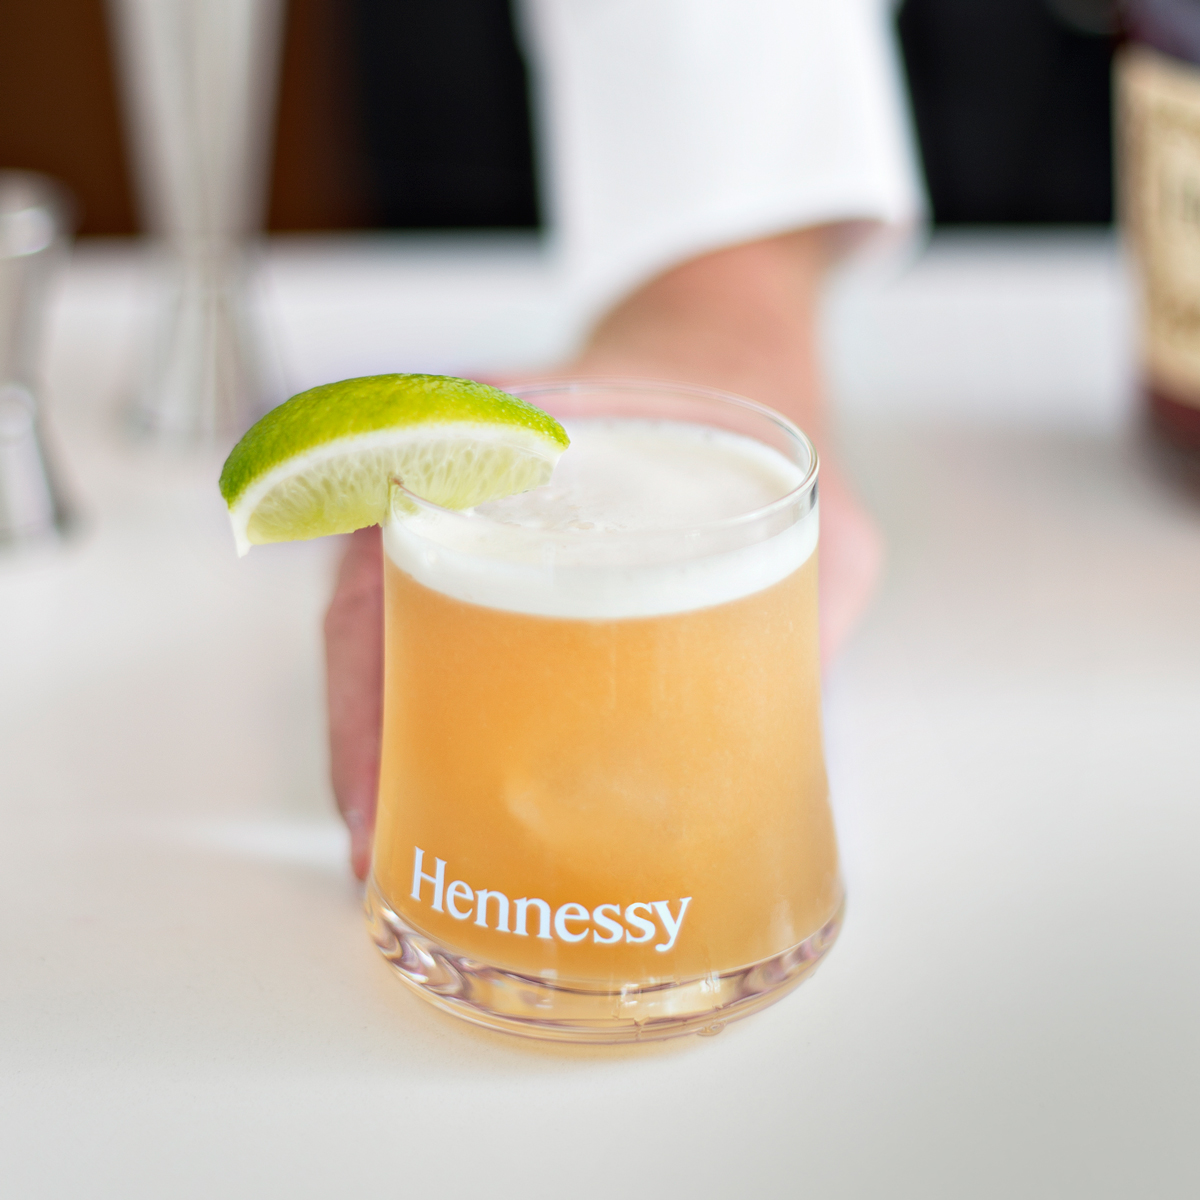 Hennessy-Sour-Pineapple-2